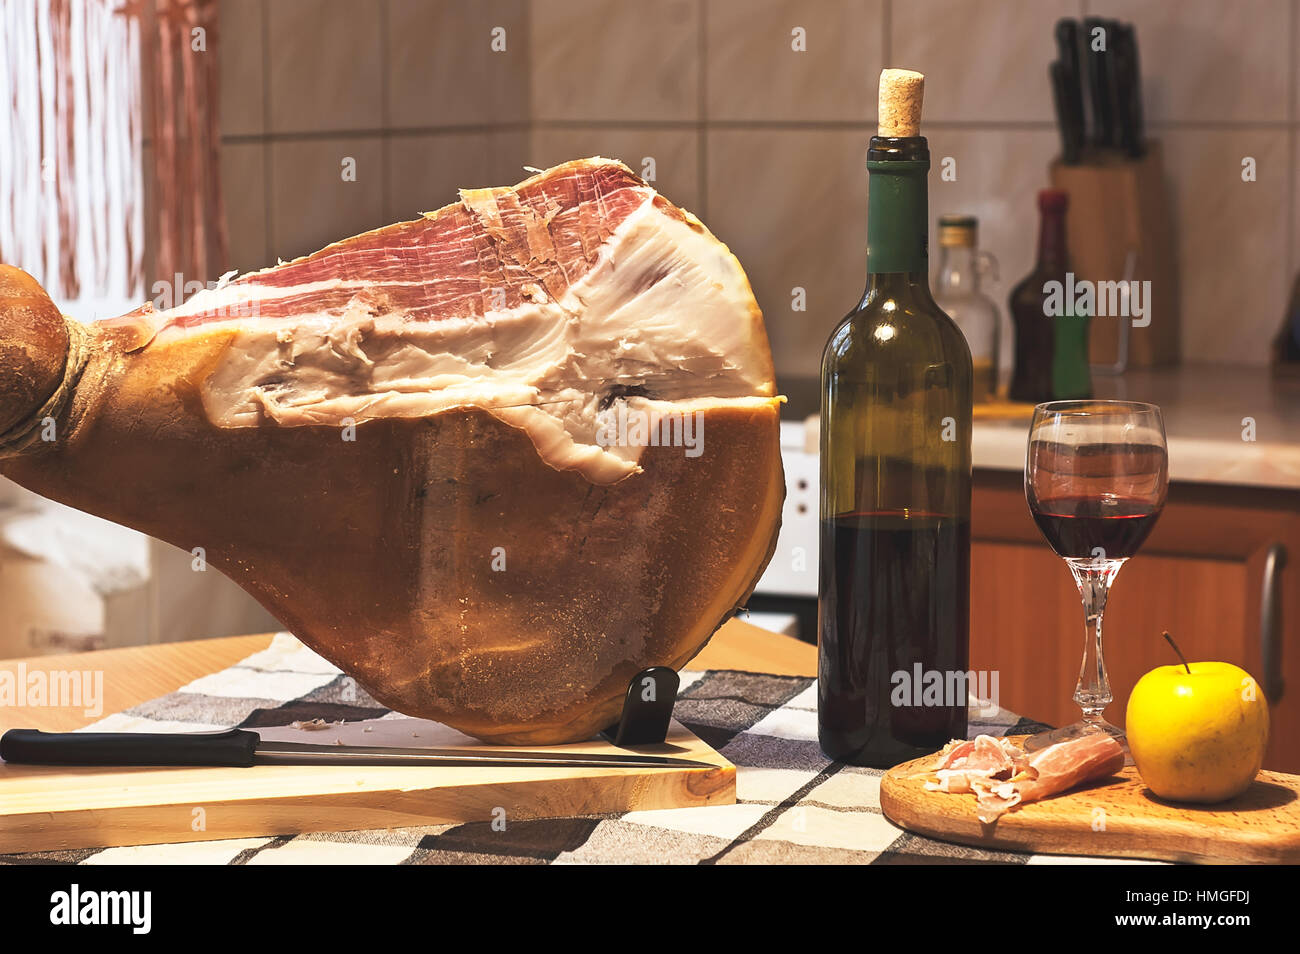 Spanish Jamon Serrano on wooden tabla jamonera with knife, apple, glass and bottle of red wine. Home cooking, food photo concept Stock Photo